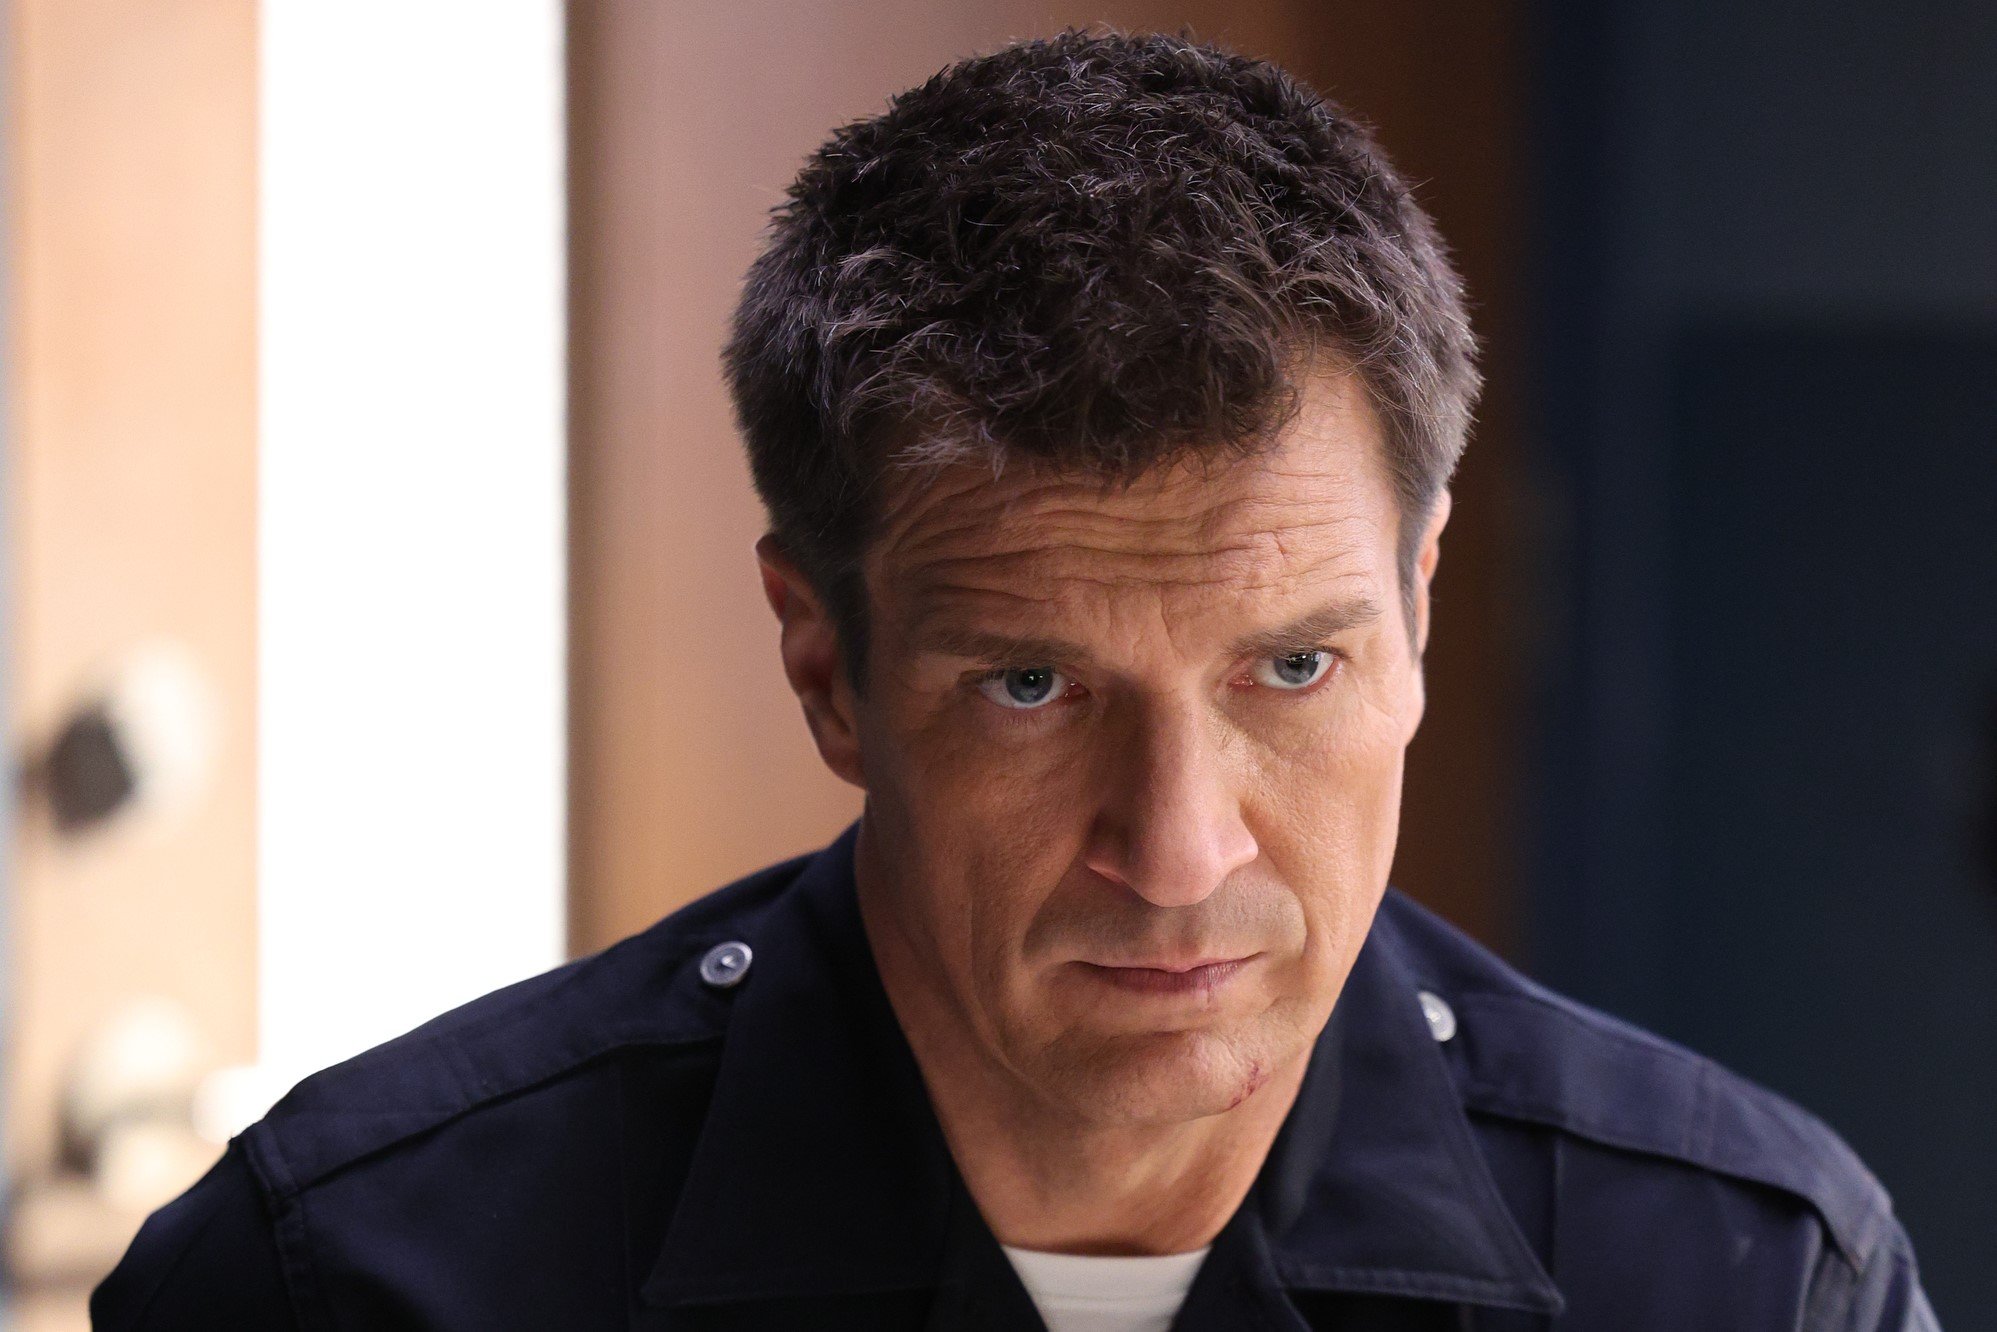 Nathan Fillion, in character as John Nolan in 'The Rookie' Season 5 Episode 9, which airs tonight, Dec. 4, on ABC, wears his blue police uniform.